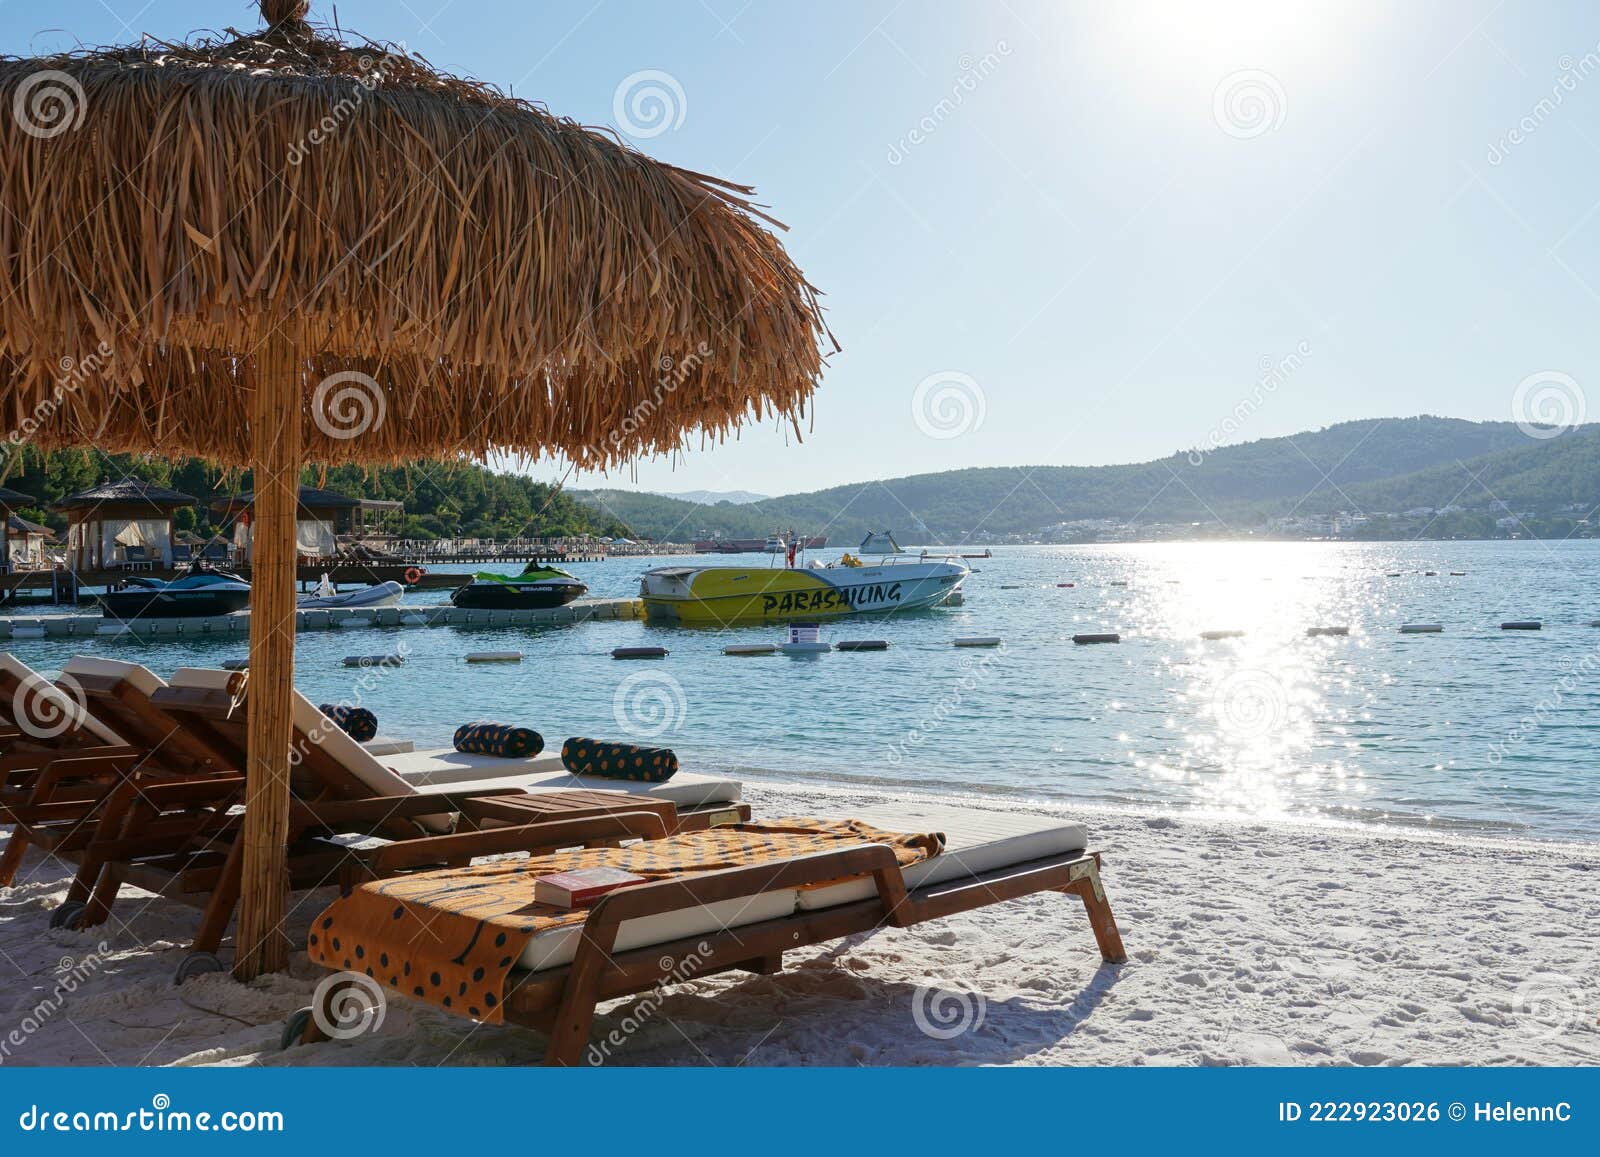 bodrum, turkey - august, 2020 hotel lujo, beautiful aegean sea turquoise blue color and palm trees on the beach. sun